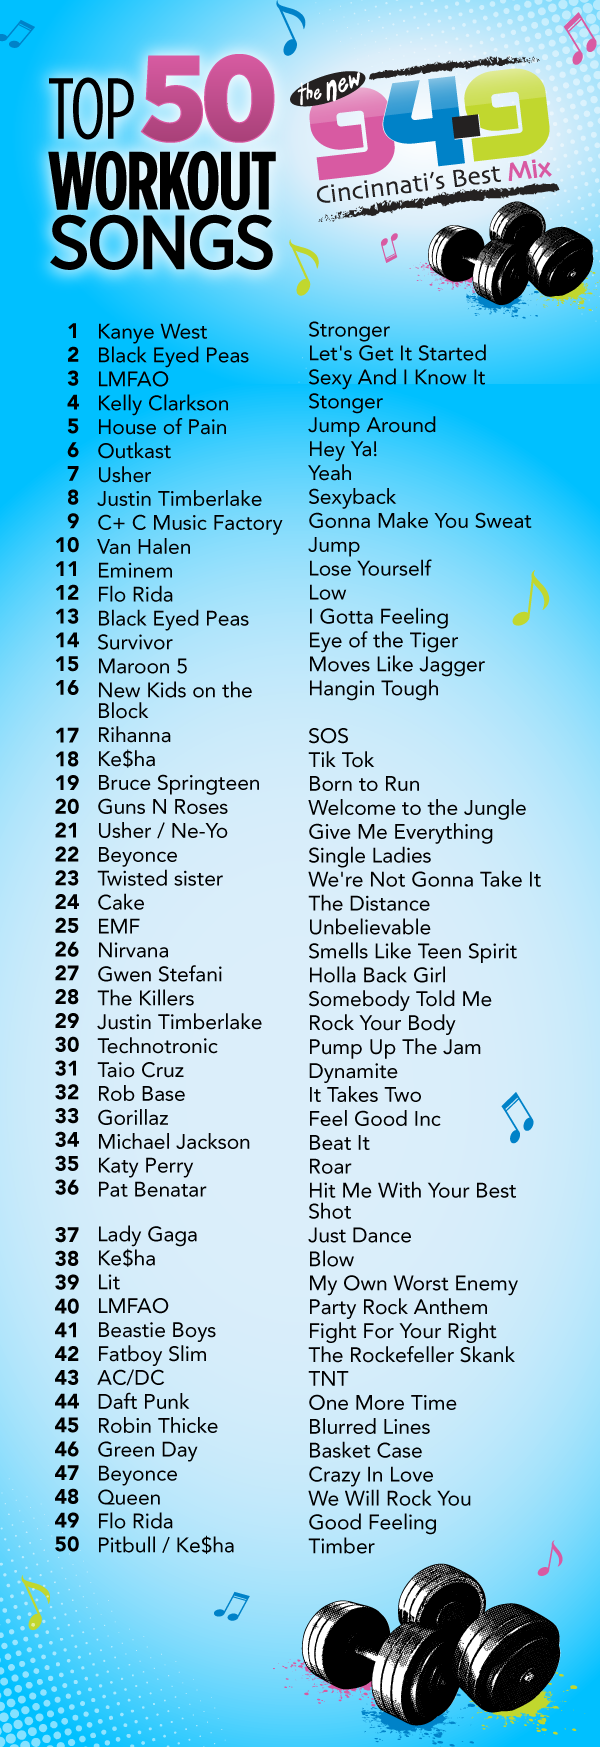 Top 50 Workout Songs. Whats your favorite song on the list?